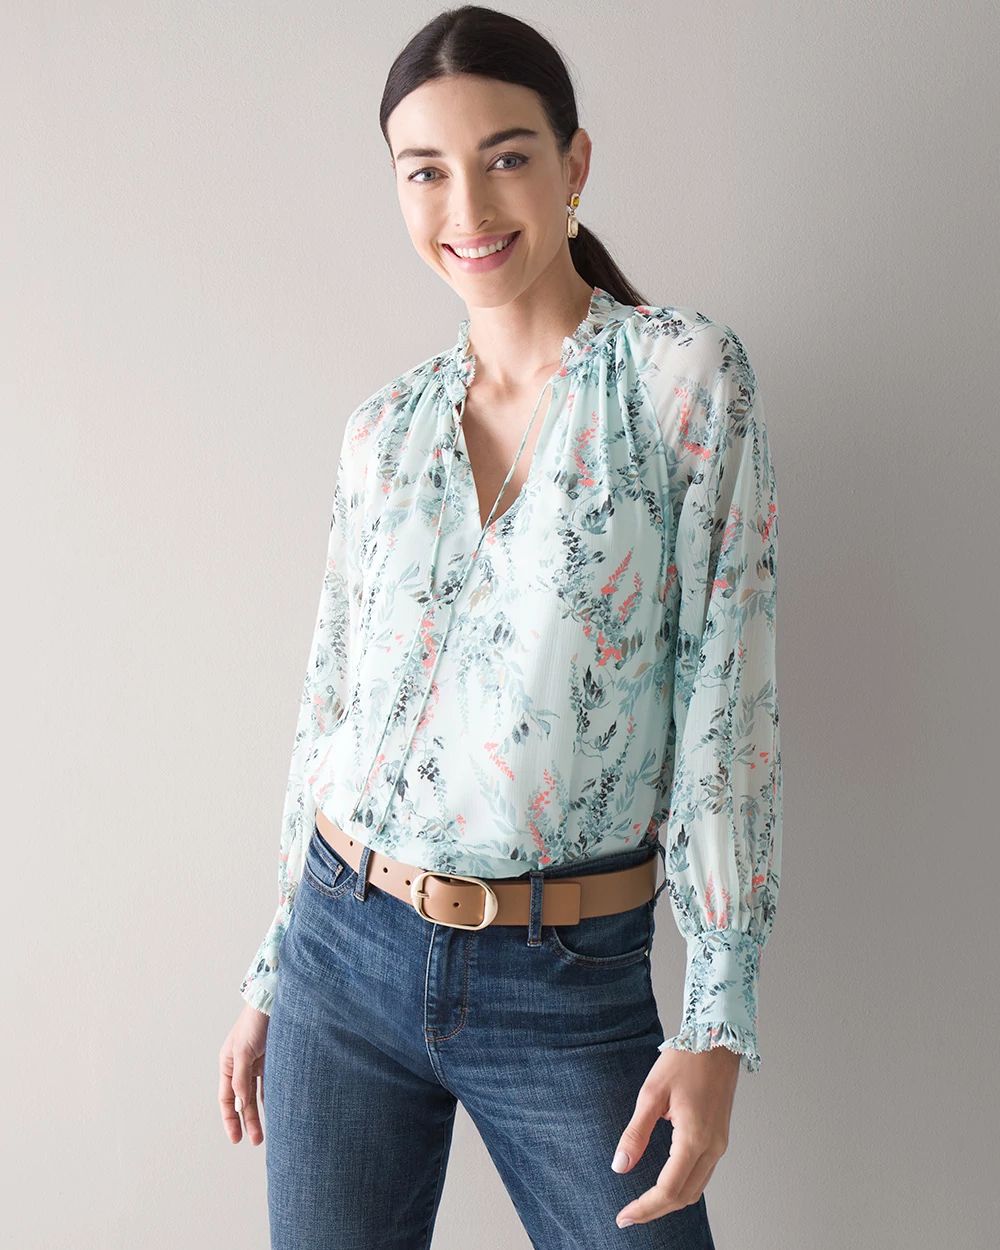 Long-Sleeve Ruffle Neck Blouse click to view larger image.